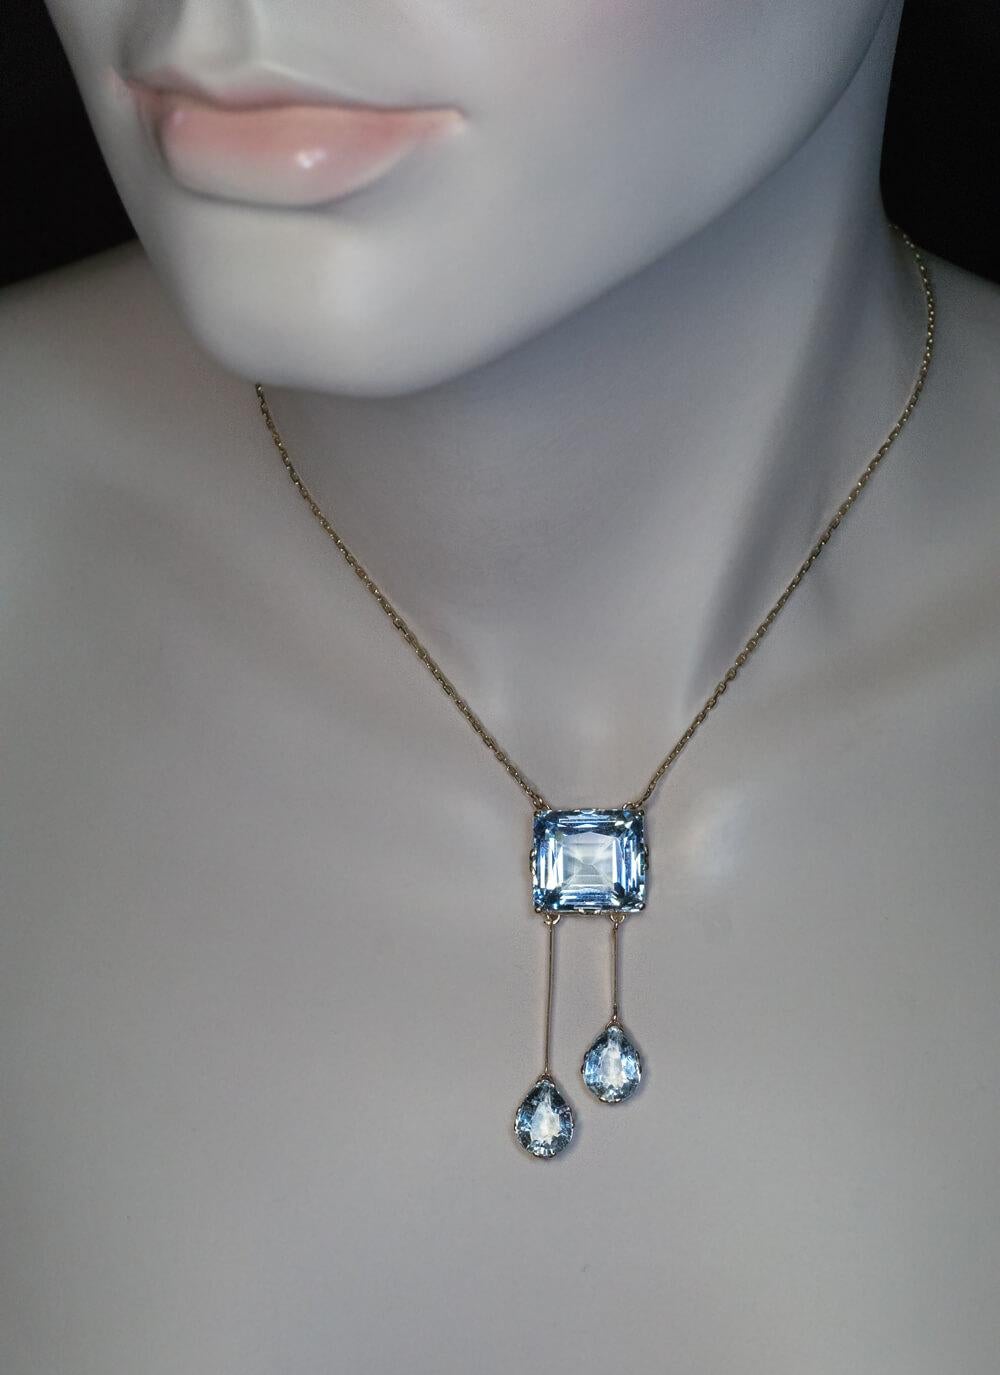 Made in Saint Petersburg between 1908 and 1917.

The 14K gold necklace features a 21.89 ct rectangular mixed cut aquamarine of an excellent saturated greenish blue color, accented by two sparkling drop shaped smaller aquamarines.

Total length of